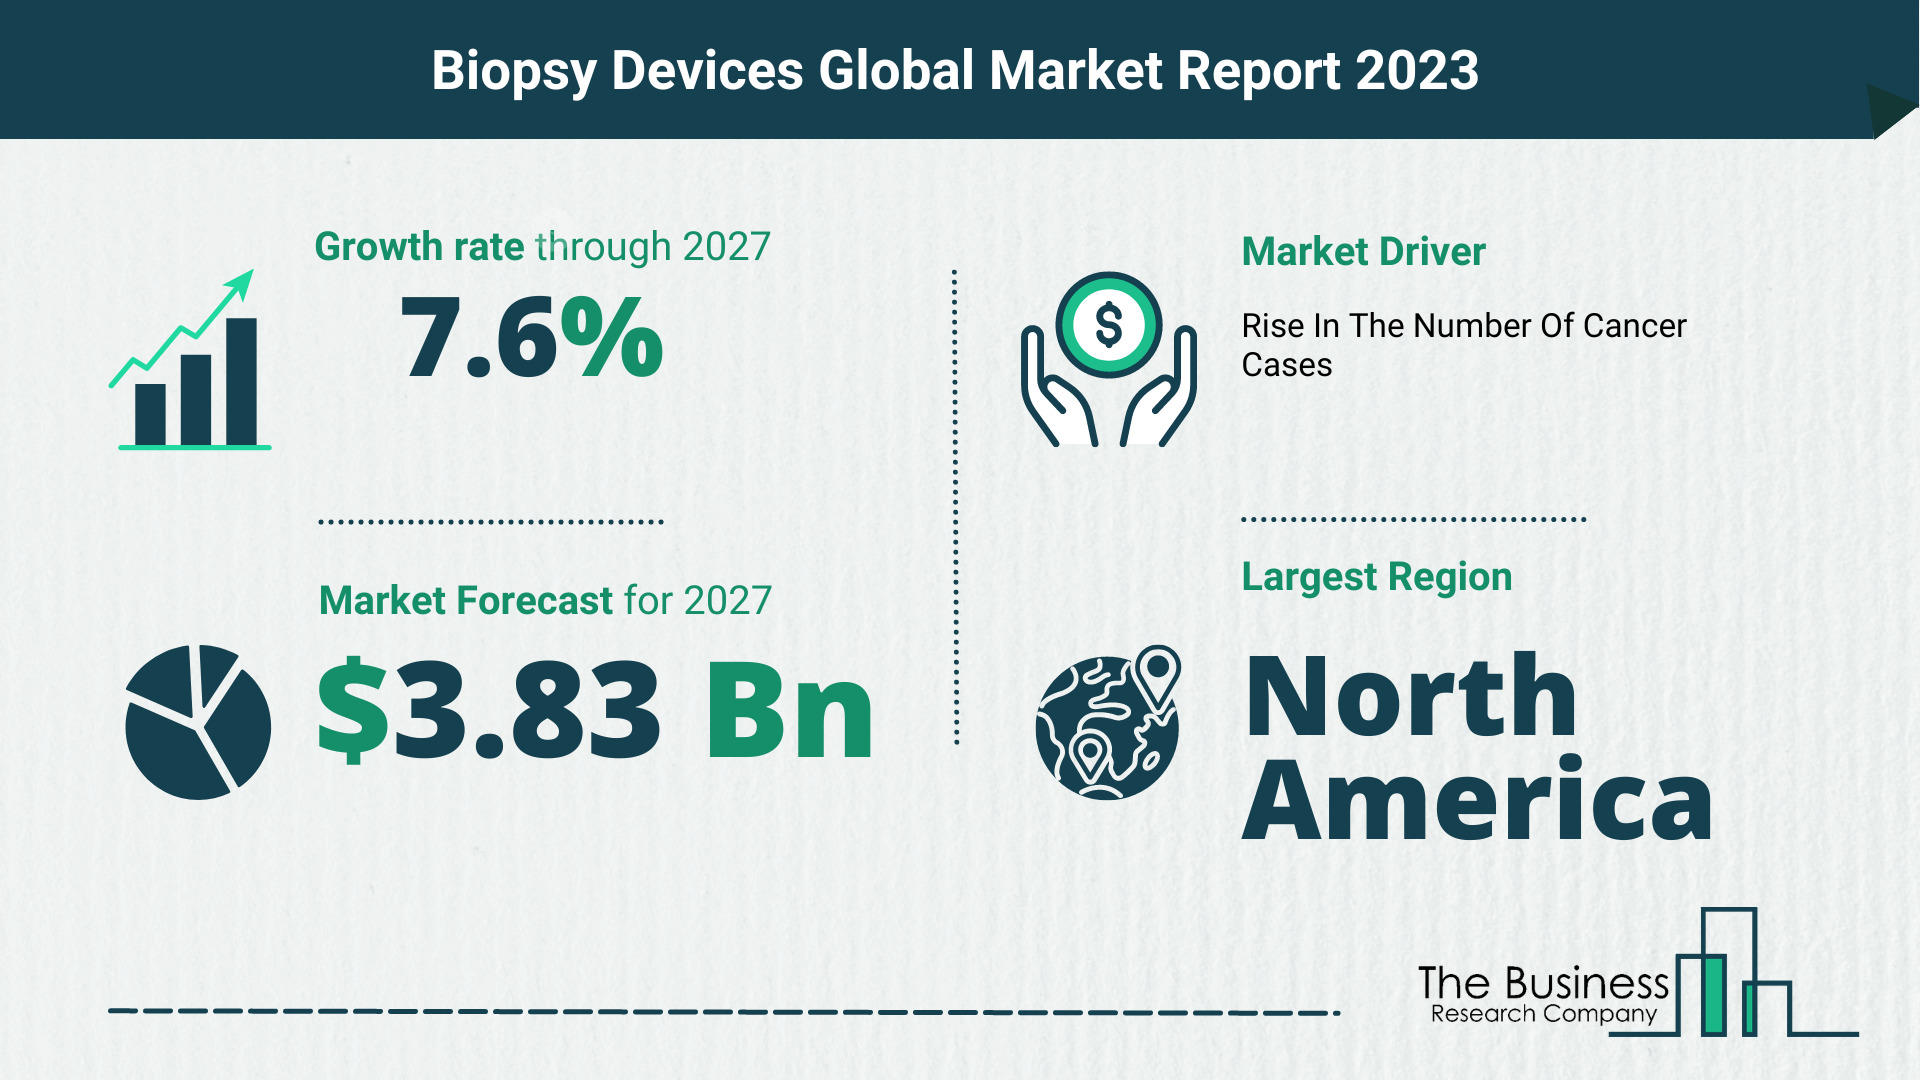 How Will The Biopsy Devices Market Globally Expand In 2023?